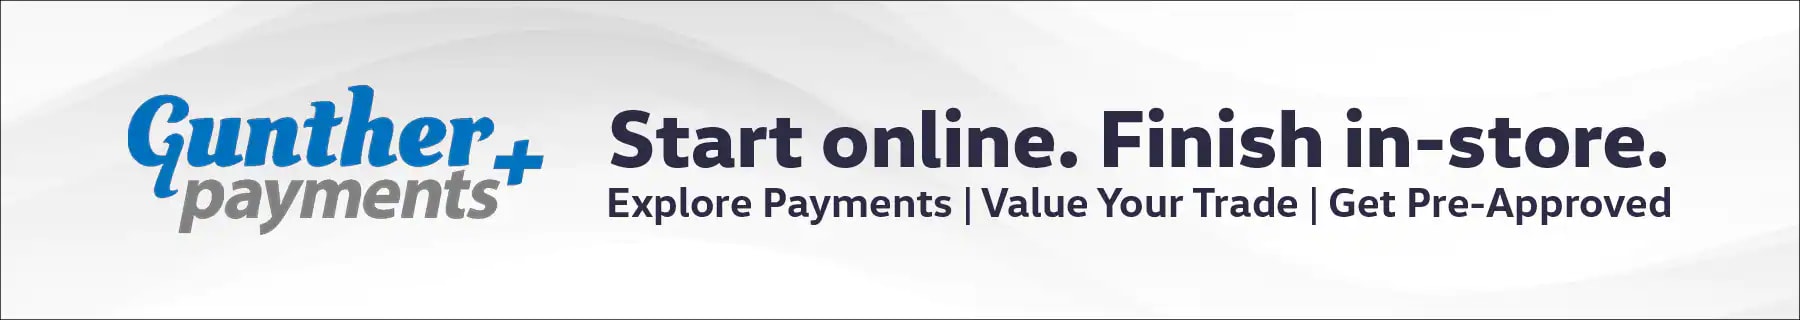 Gunther Plus Payments. Start Online. Finish in-store. Explore payments, value your trade, get pre-approved.